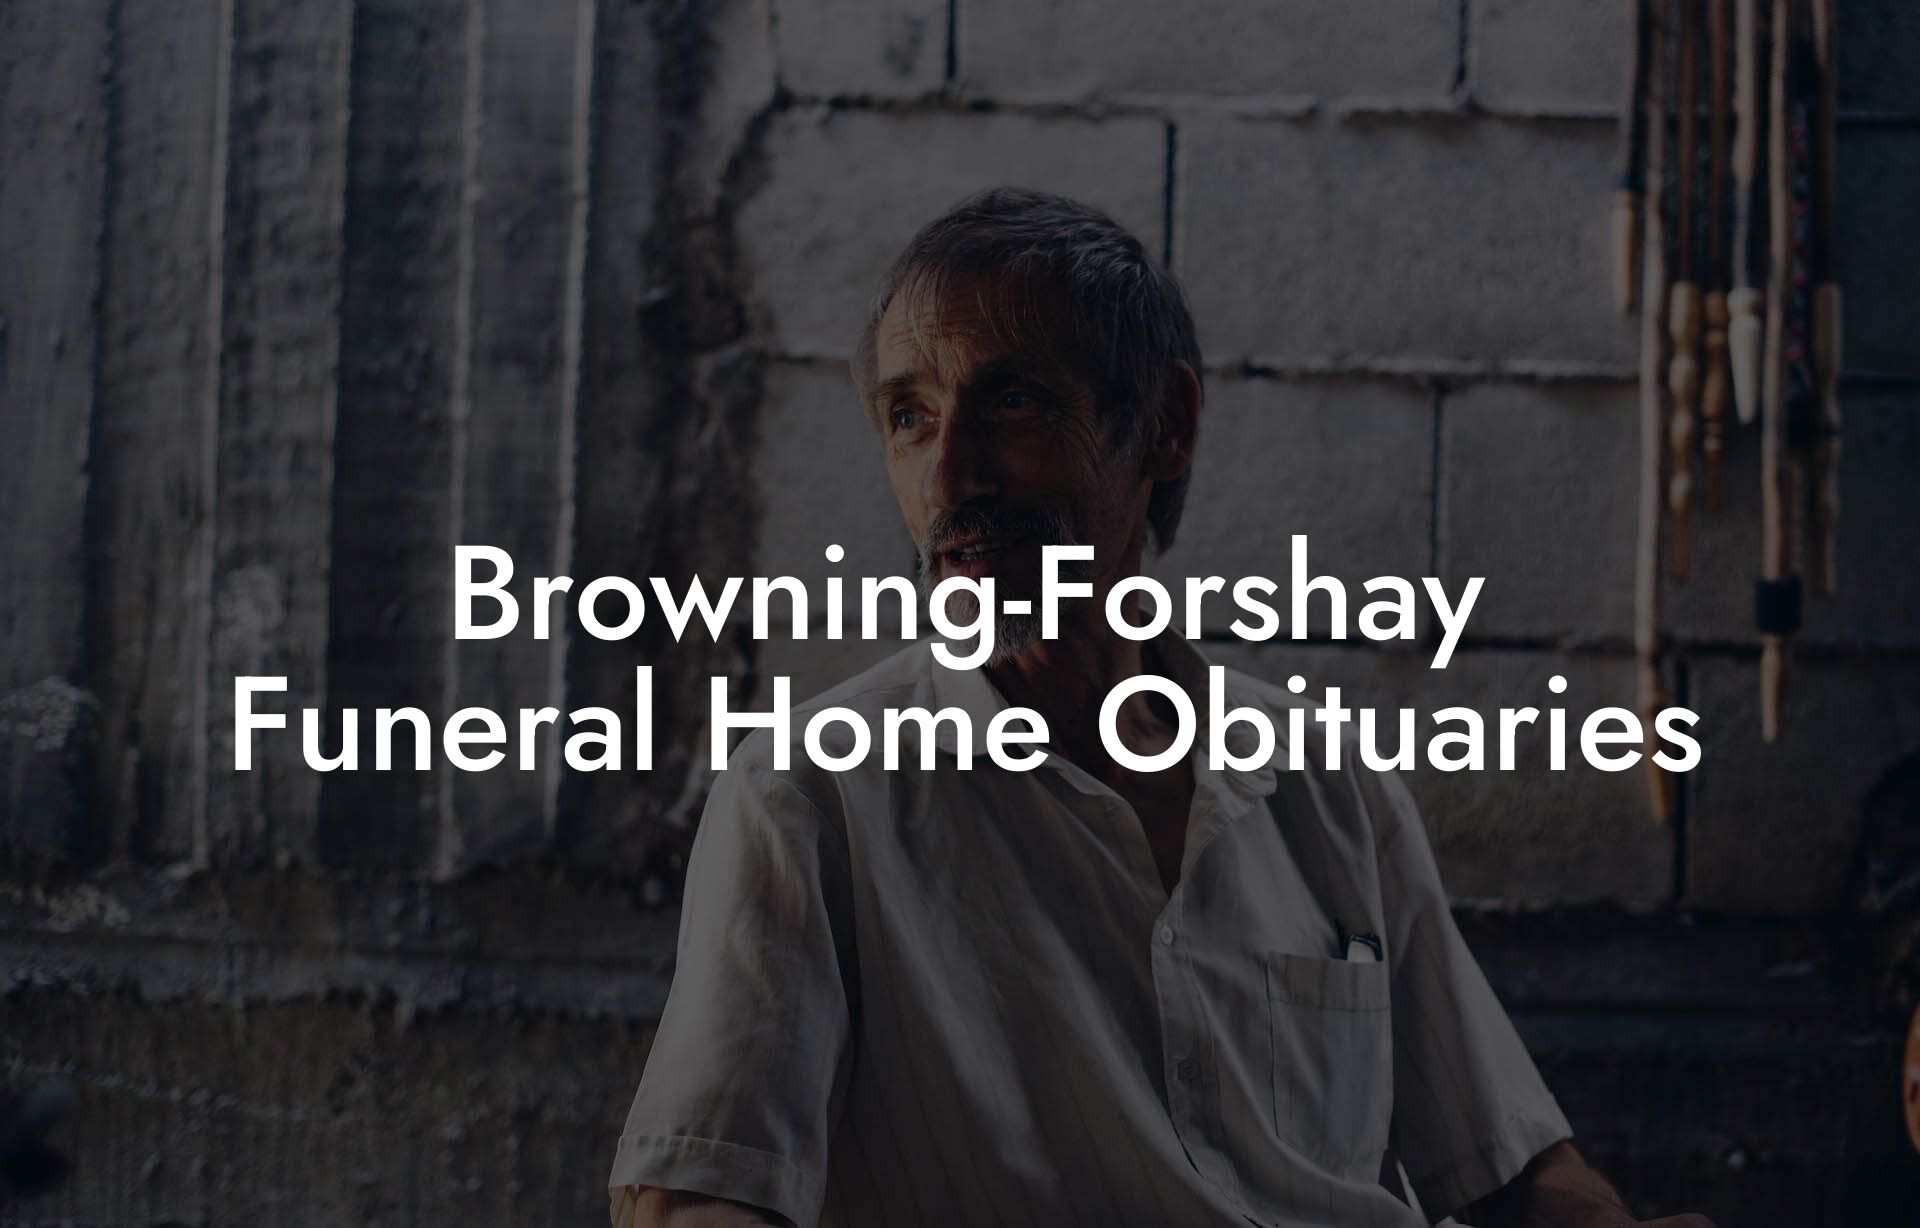 Browning-Forshay Funeral Home Obituaries